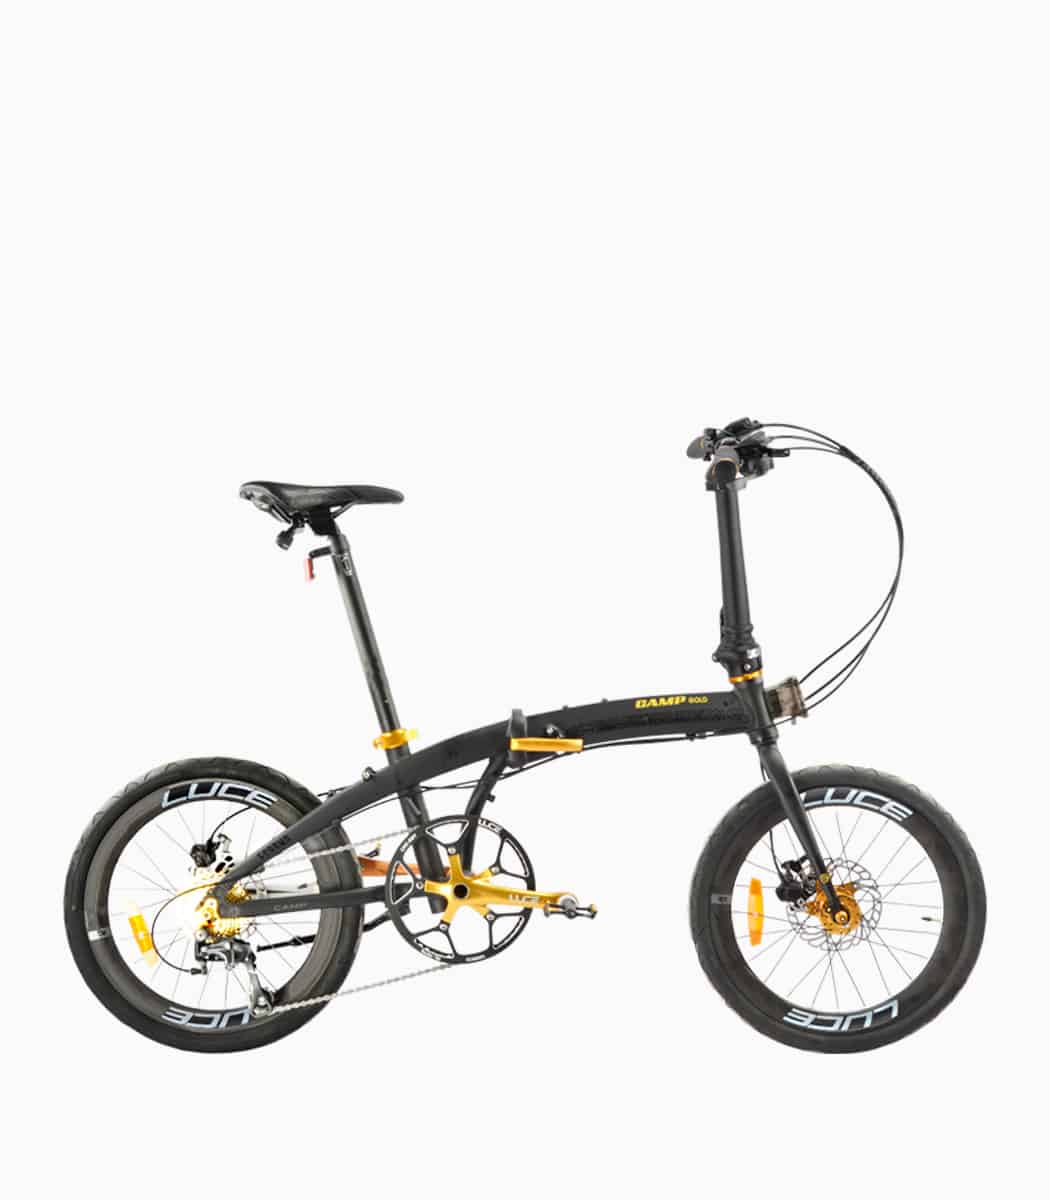 CAMP GOLD BLACK foldable bicycle right V3 - Home